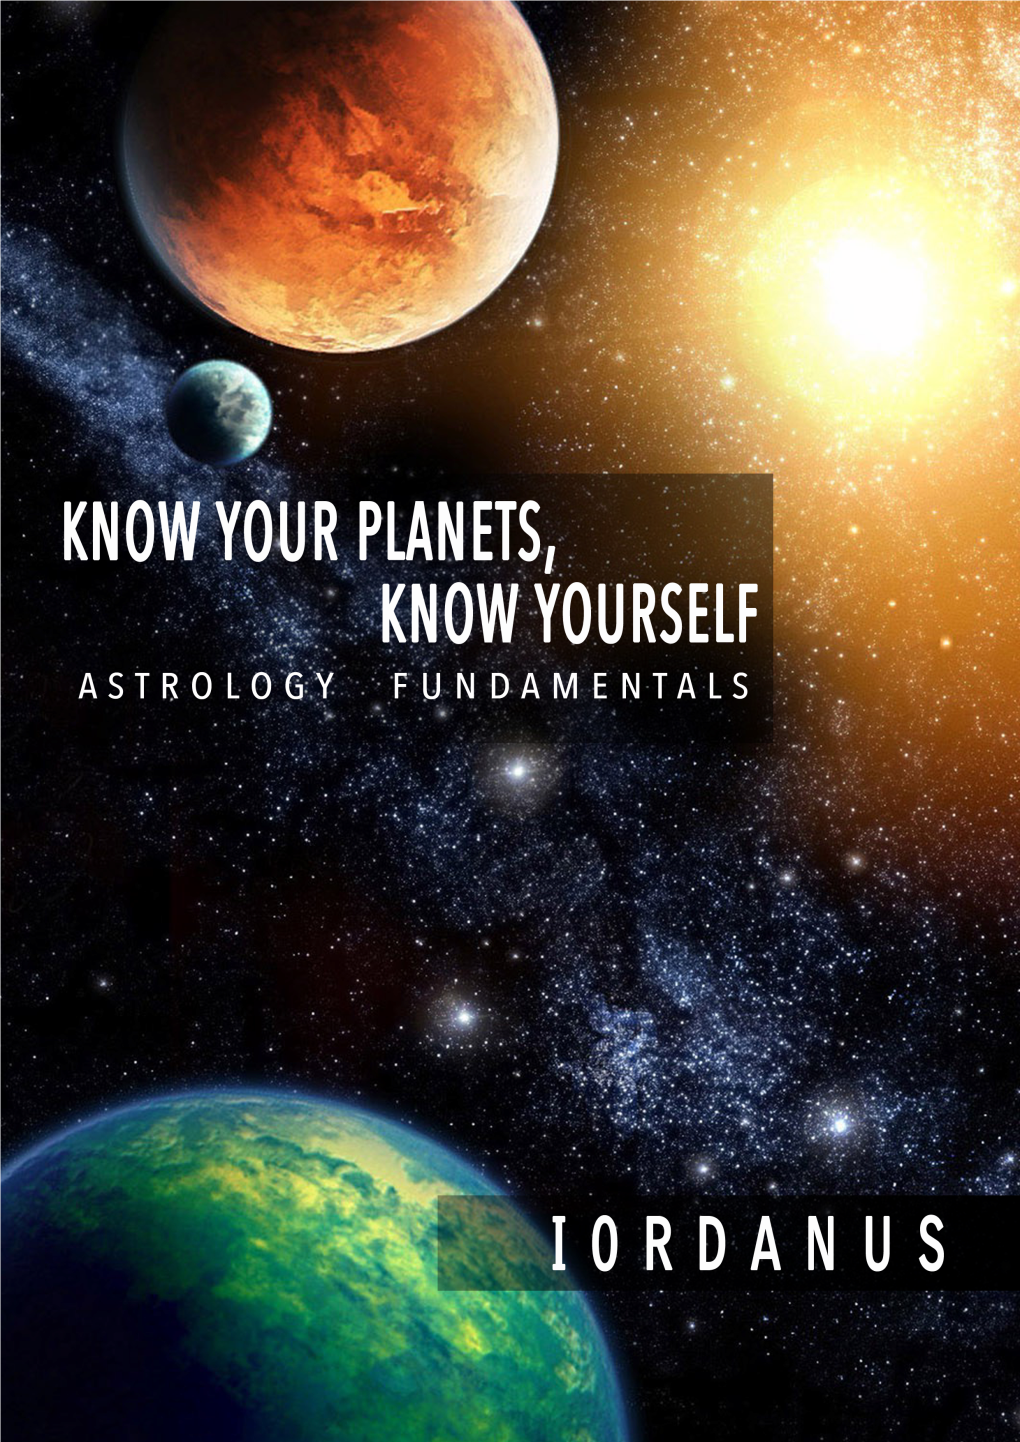 Know Your Planets